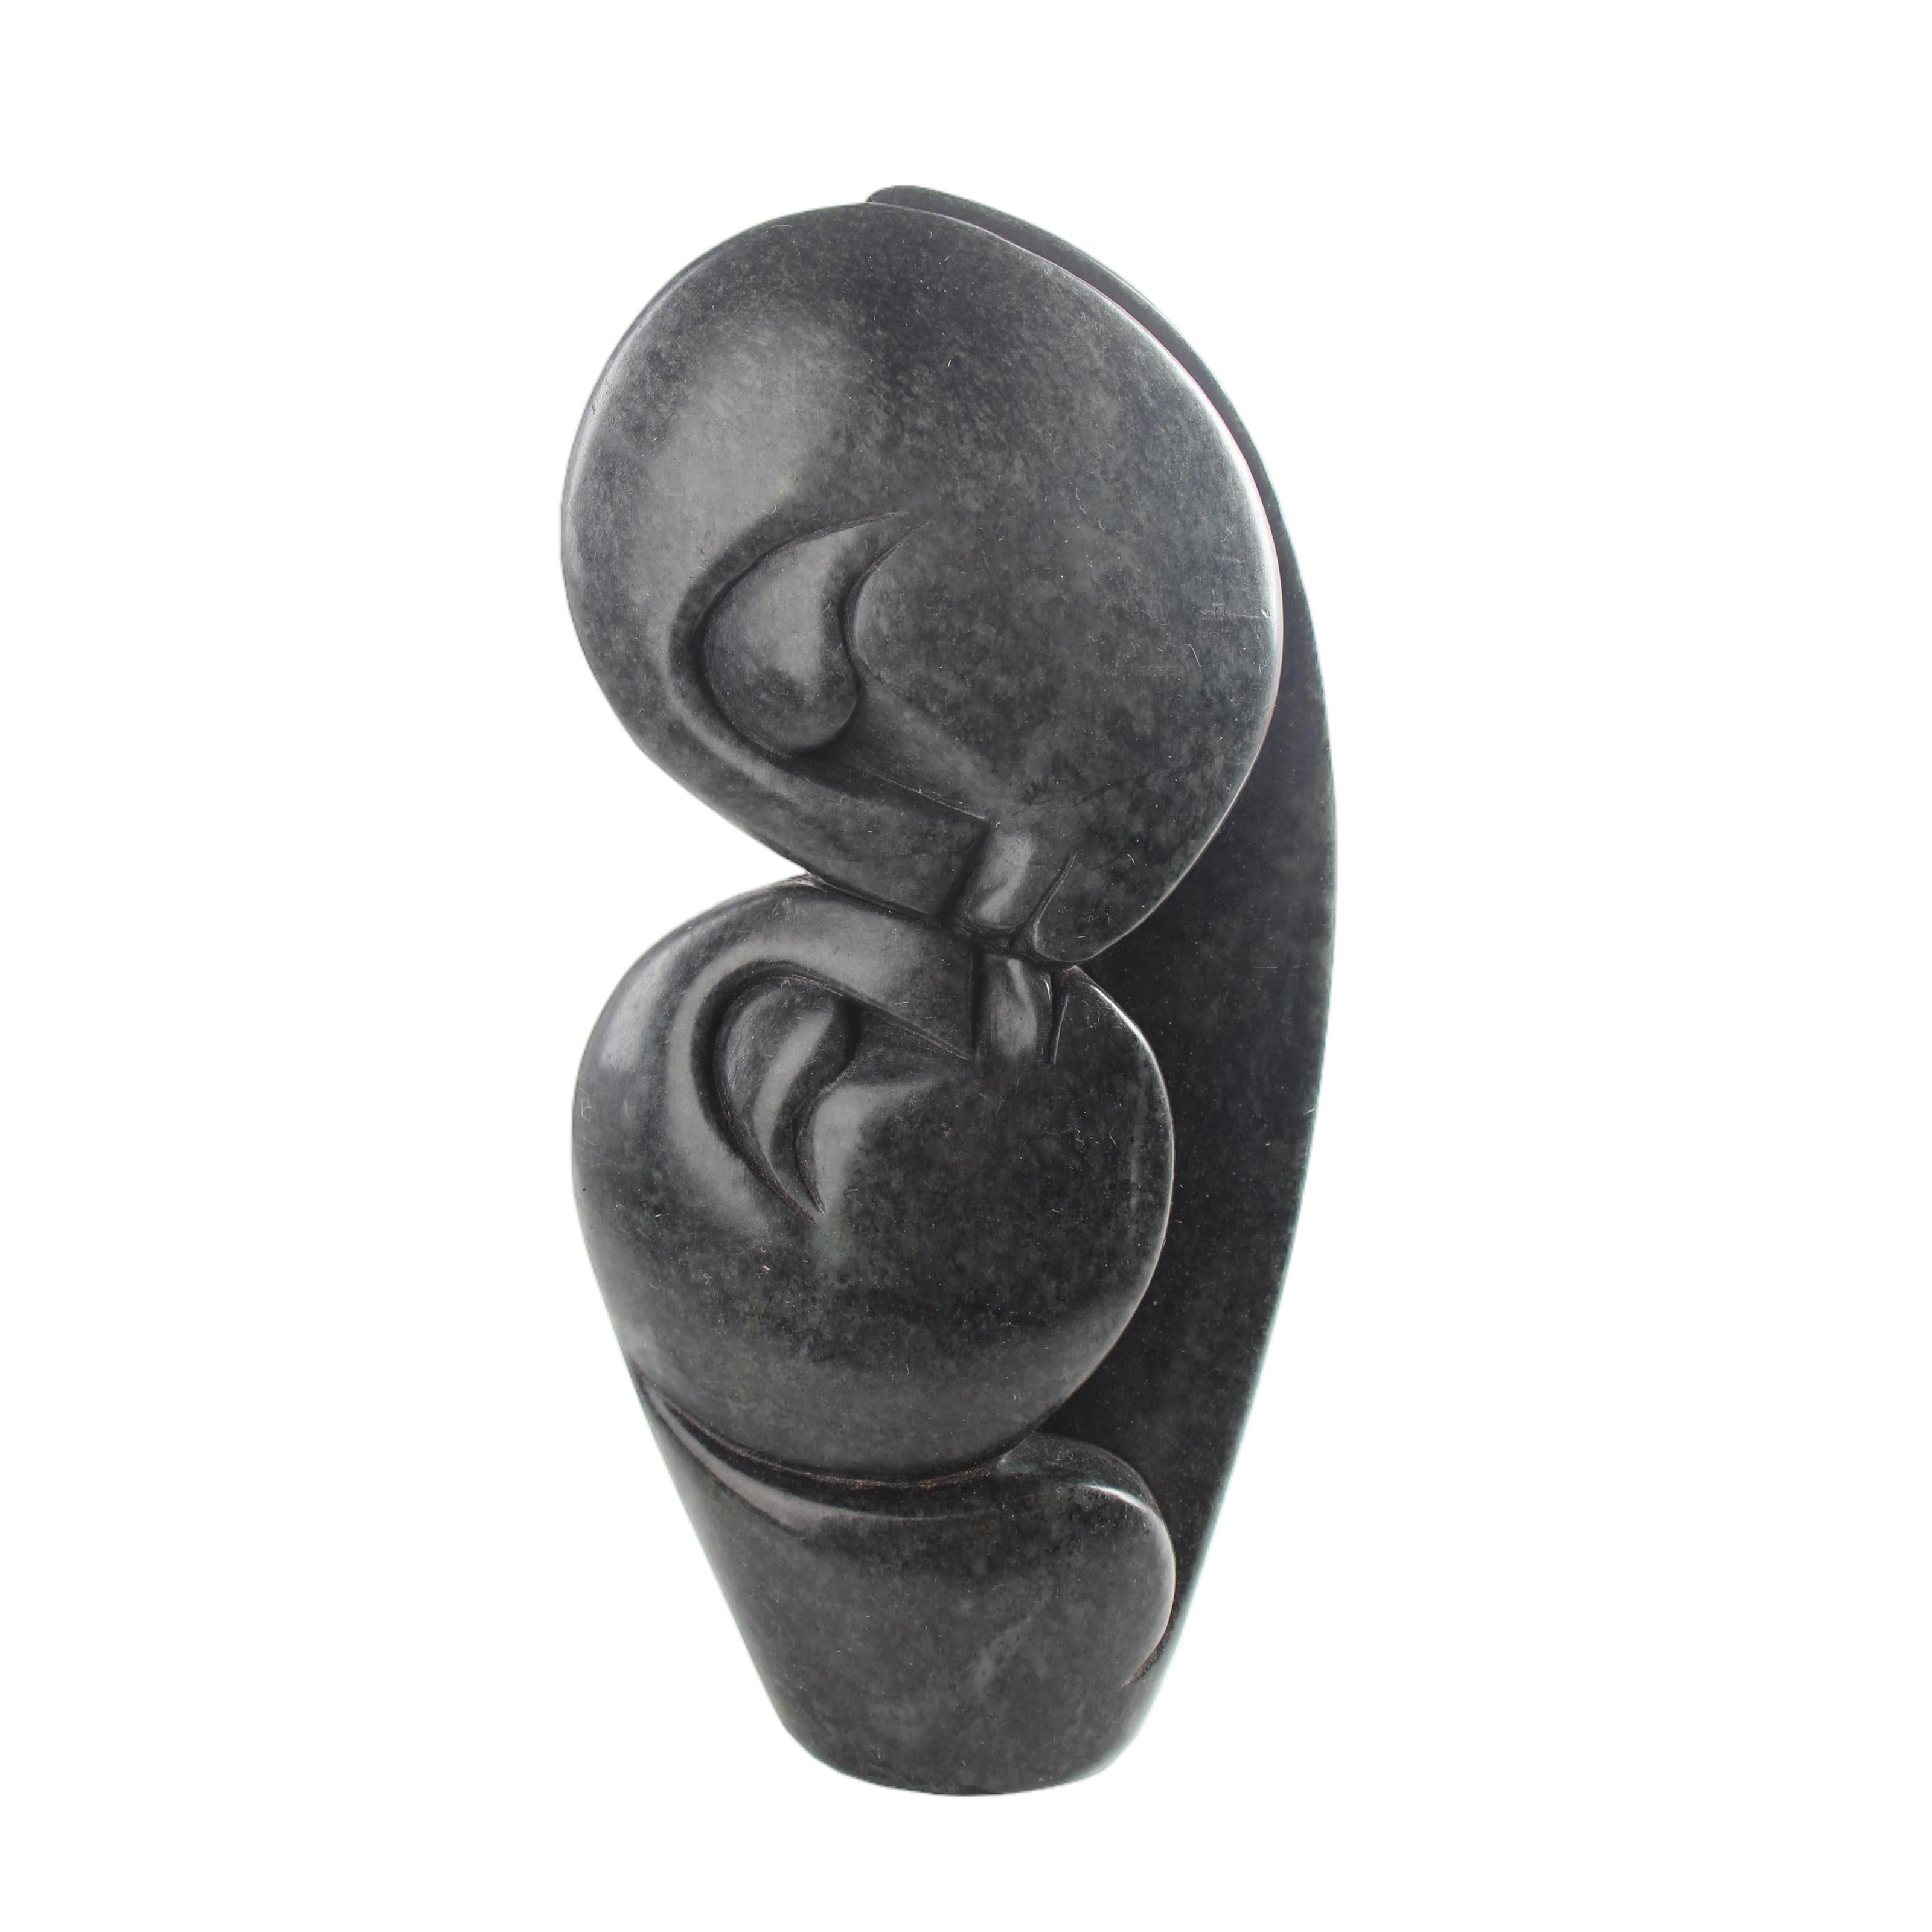 Shona Tribe Serpentine Stone Lovers ~7.5" Tall - Lovers